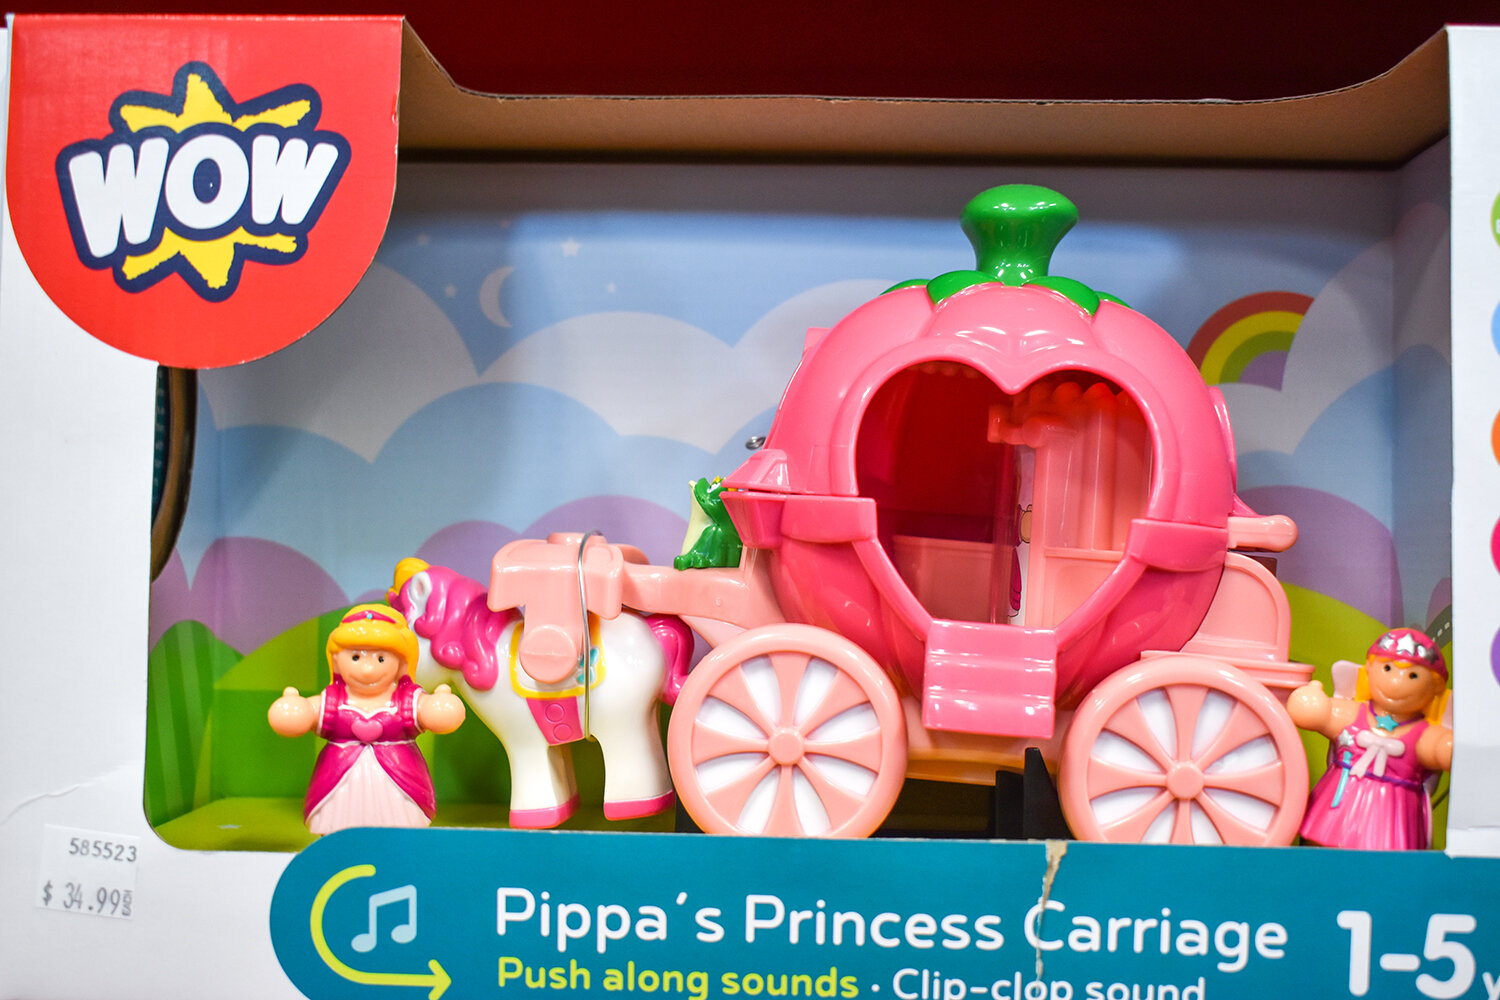 Phillips Toy Mart Car WOW Pippa's Princess Carriage.JPG